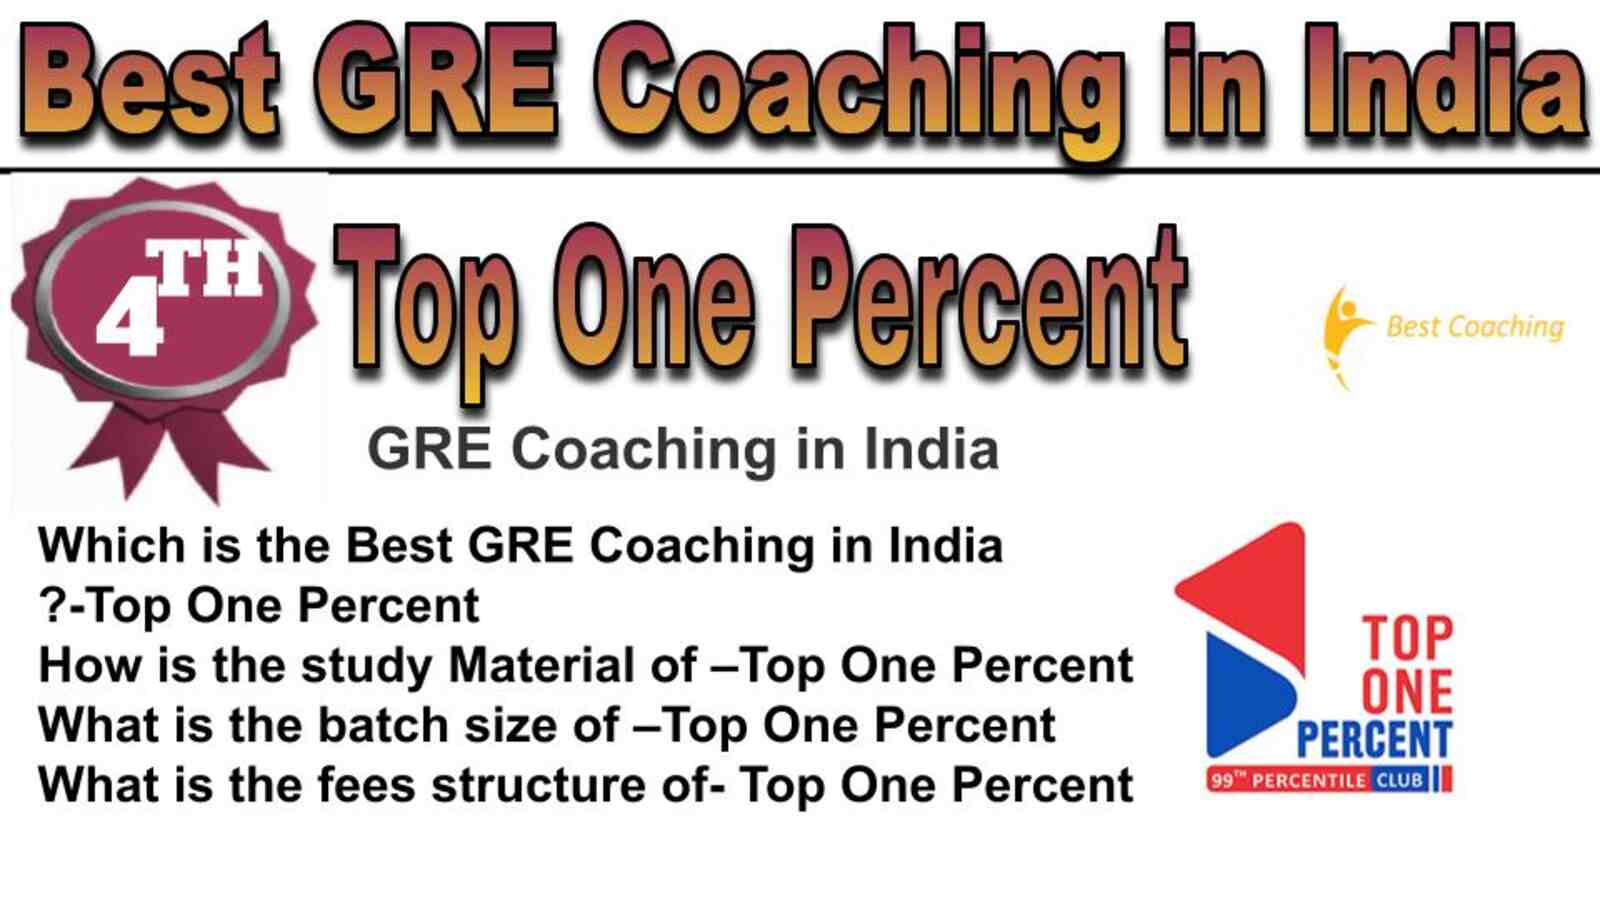 Rank 4 best GRE coaching in India